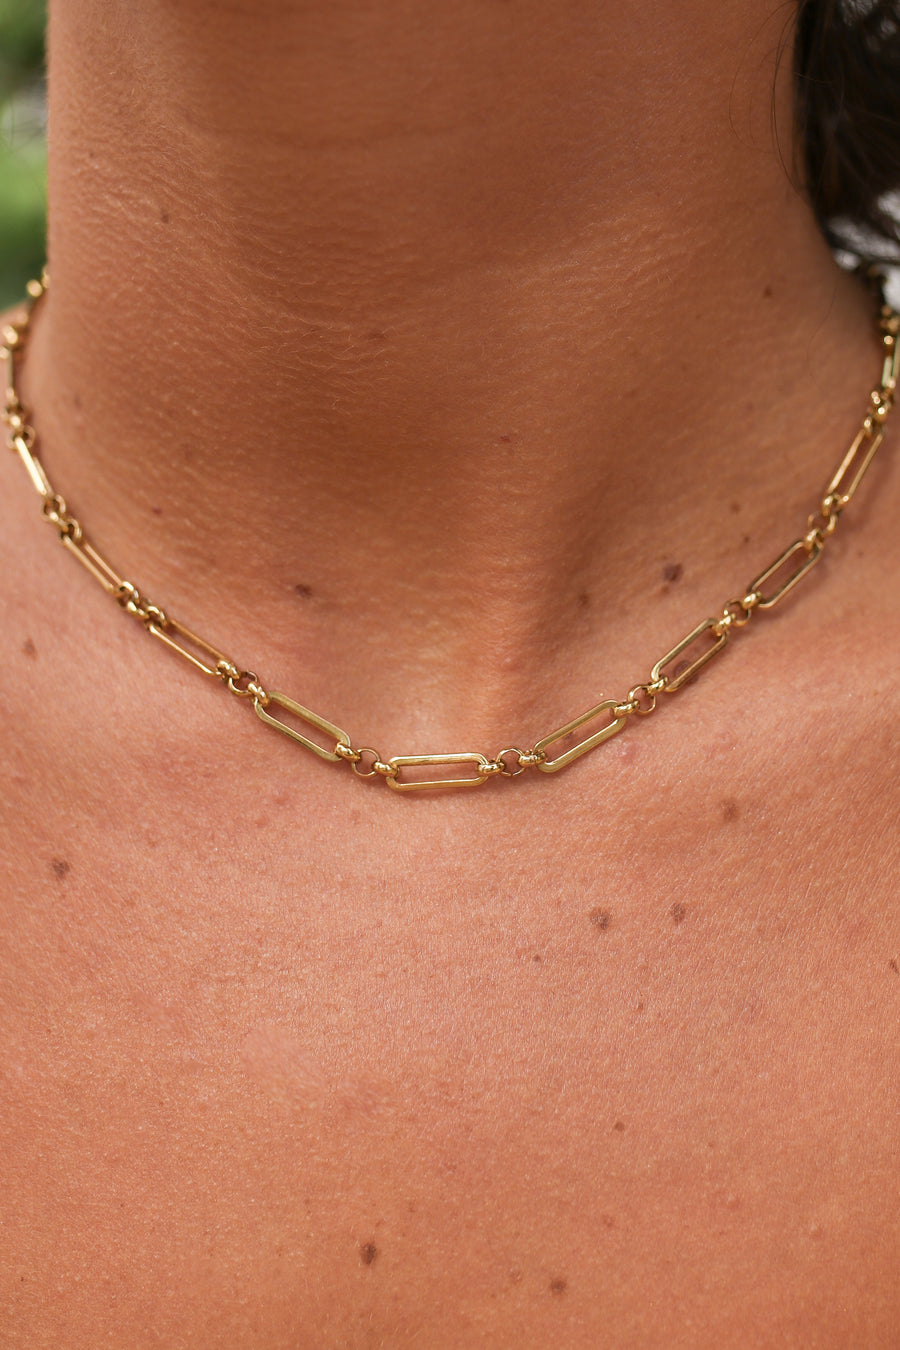 Allegra - Stainless Steel Gold or Silver Necklace